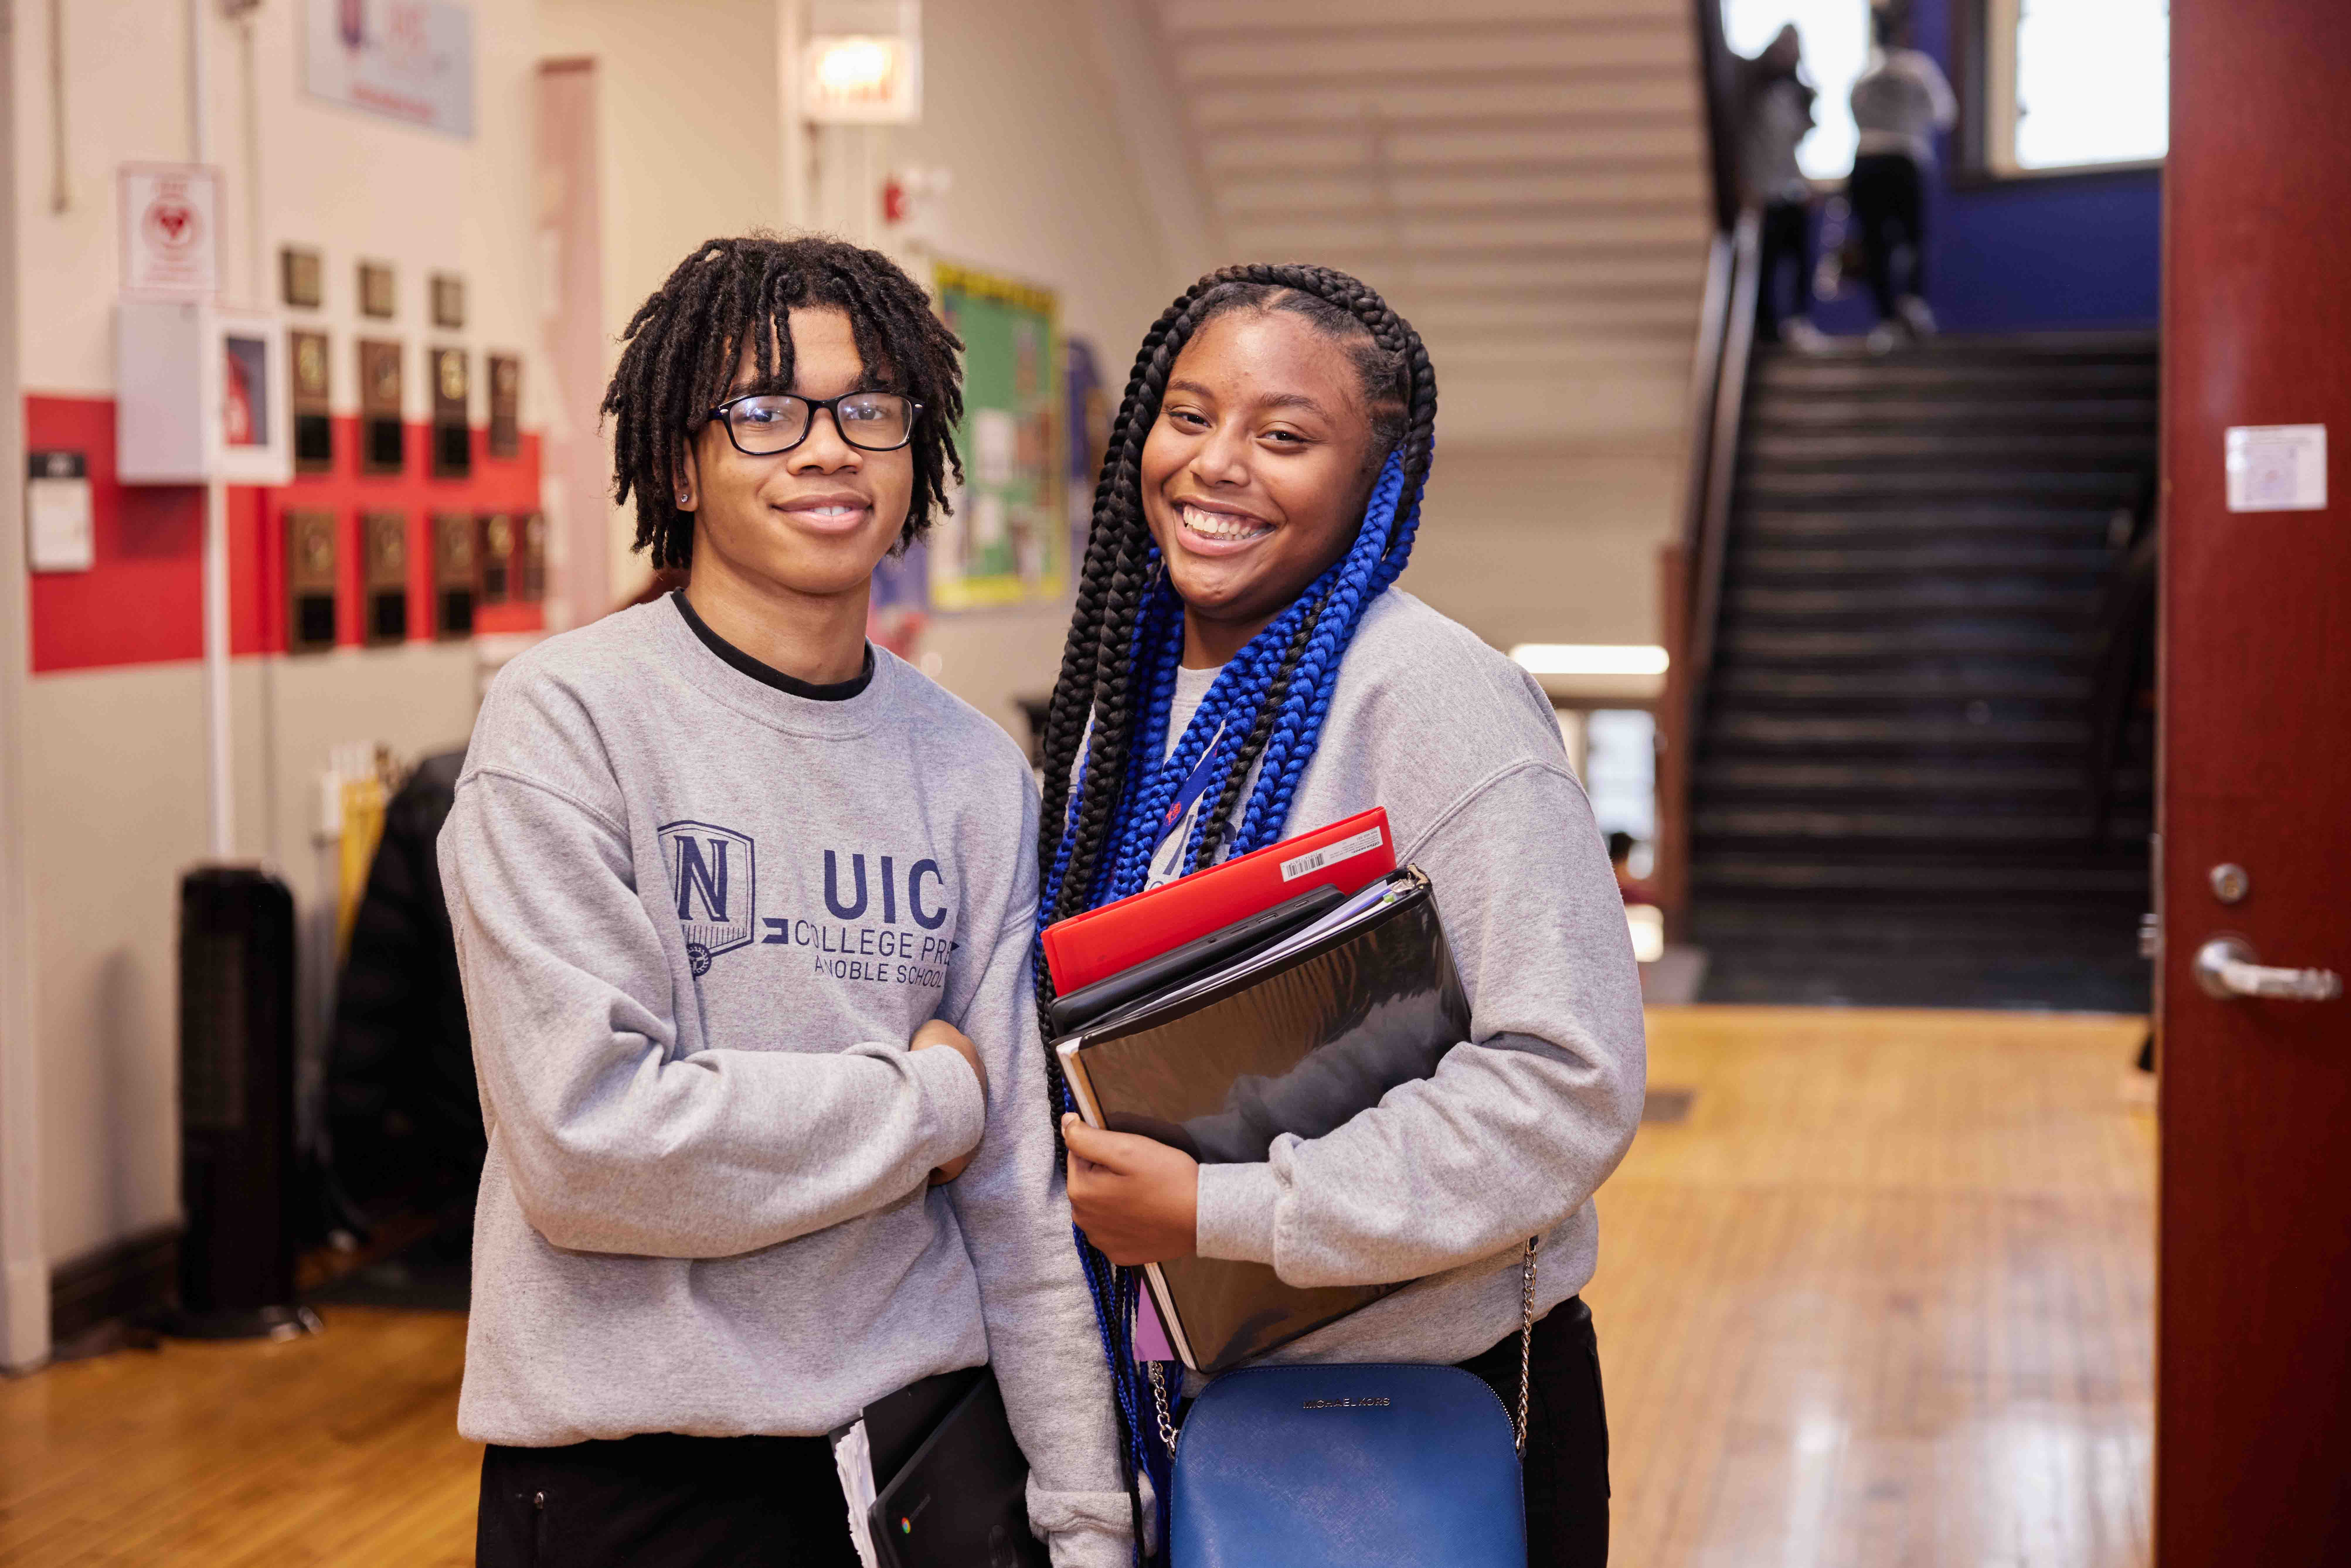 Photo shows two students at UIC College Prep in Chicago, Illinois standing in the hallway of the school building. The student on the left is a young Black man with medium-length locs. He is wearing a light grey sweatshirt with the dark blue UIC College Prep logo on it. The student on the right is a young Black girl. She has long black and blue braids. She is wearing the same light grey sweatshirt and holding a binder, a folder, and a laptop with one arm. They are leaning into each other and smiling at the camera.